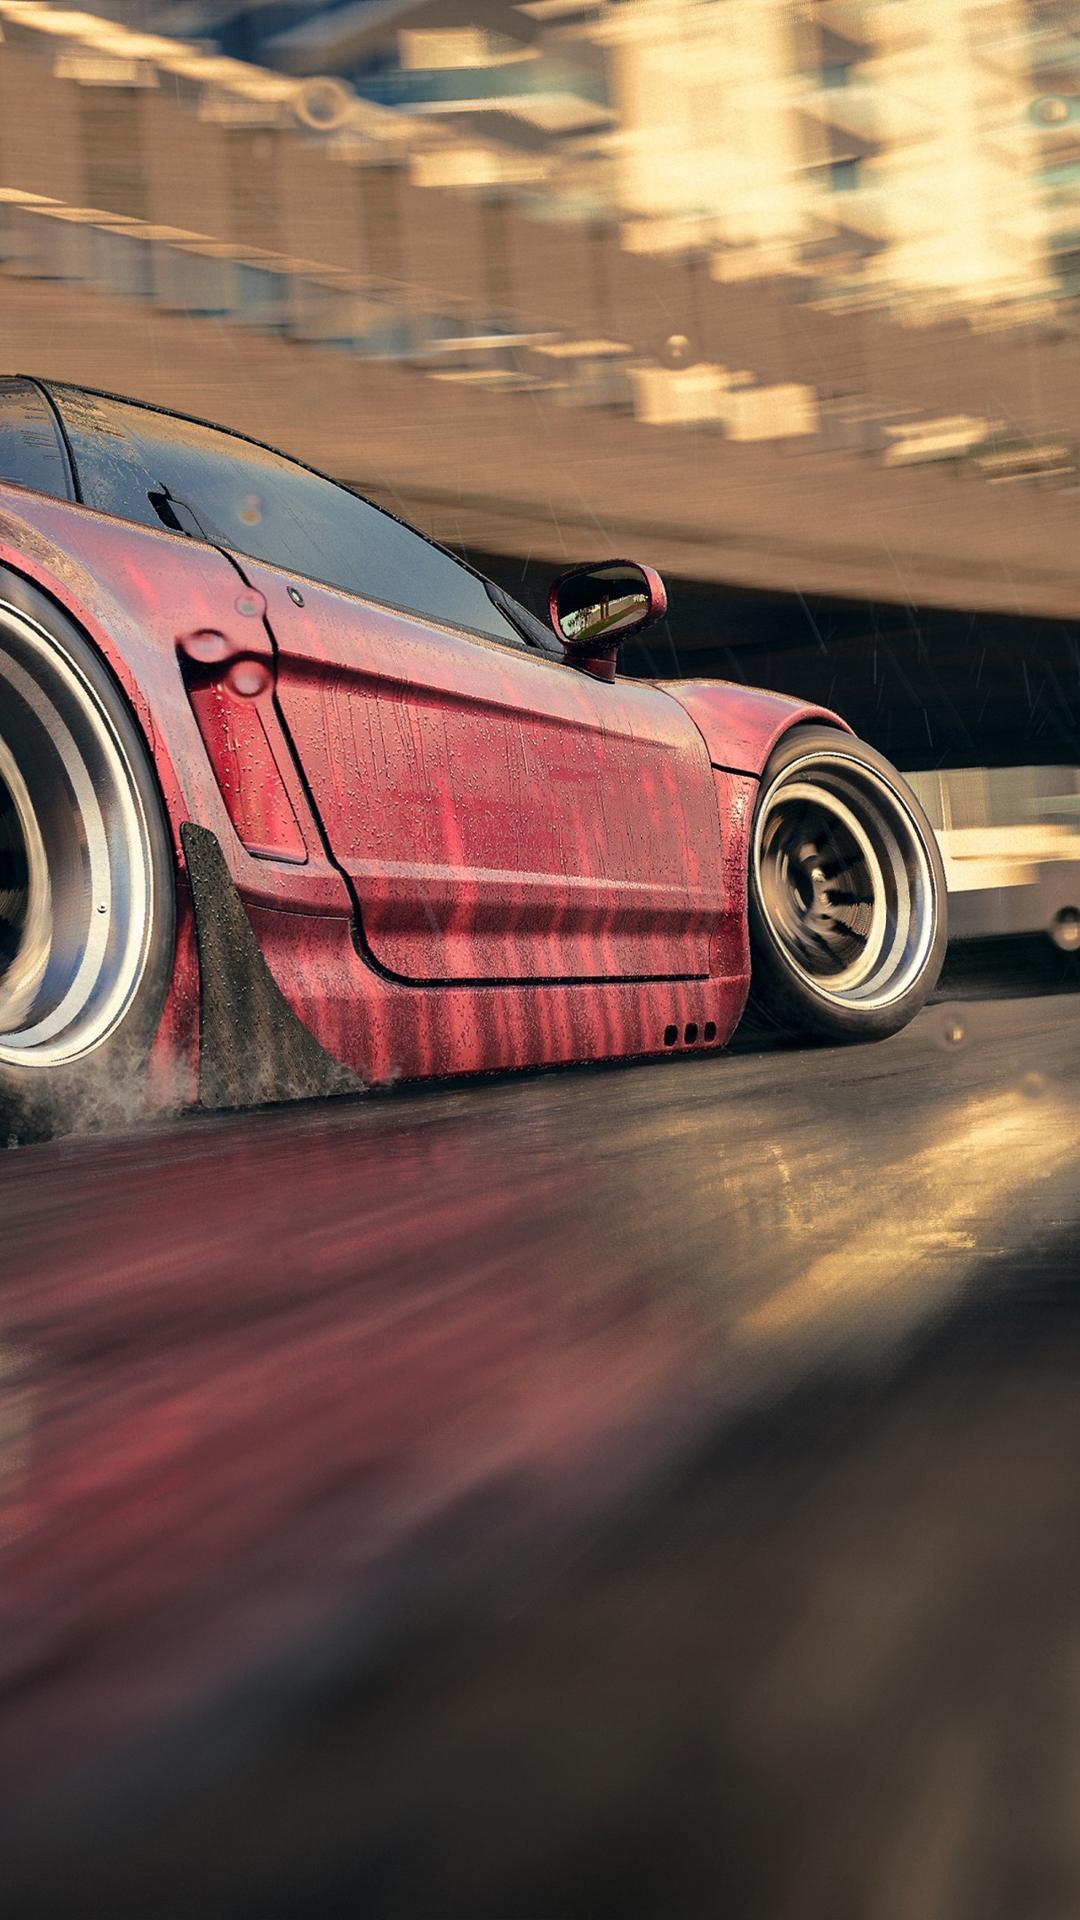 NFS HEAT 4K HD wallpaper for Android